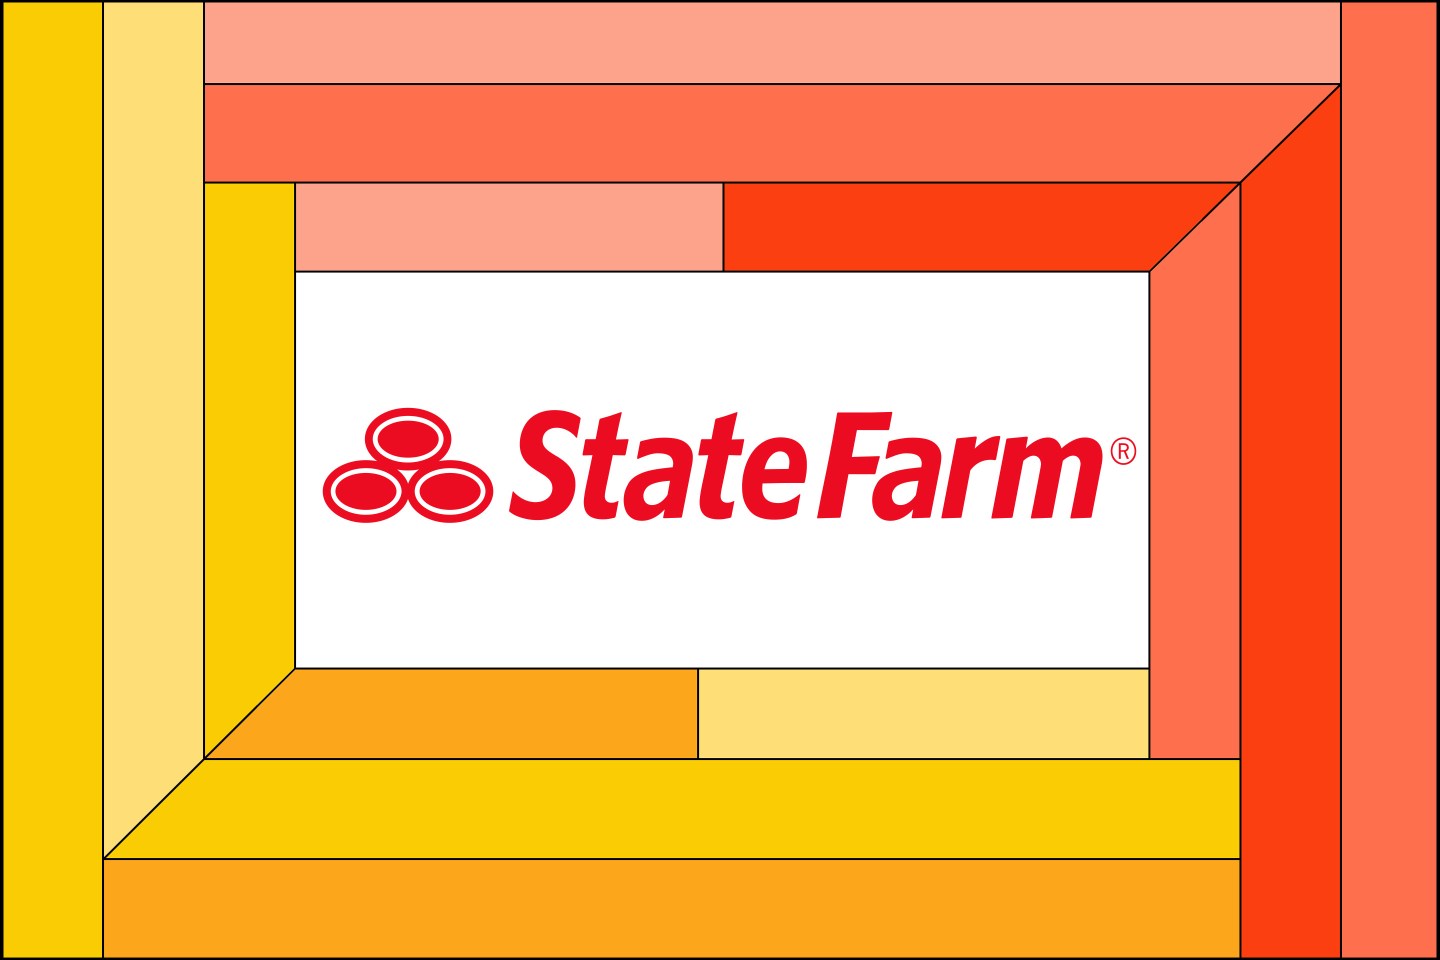 Illustration of State Farm logo inside a blue and red frame.